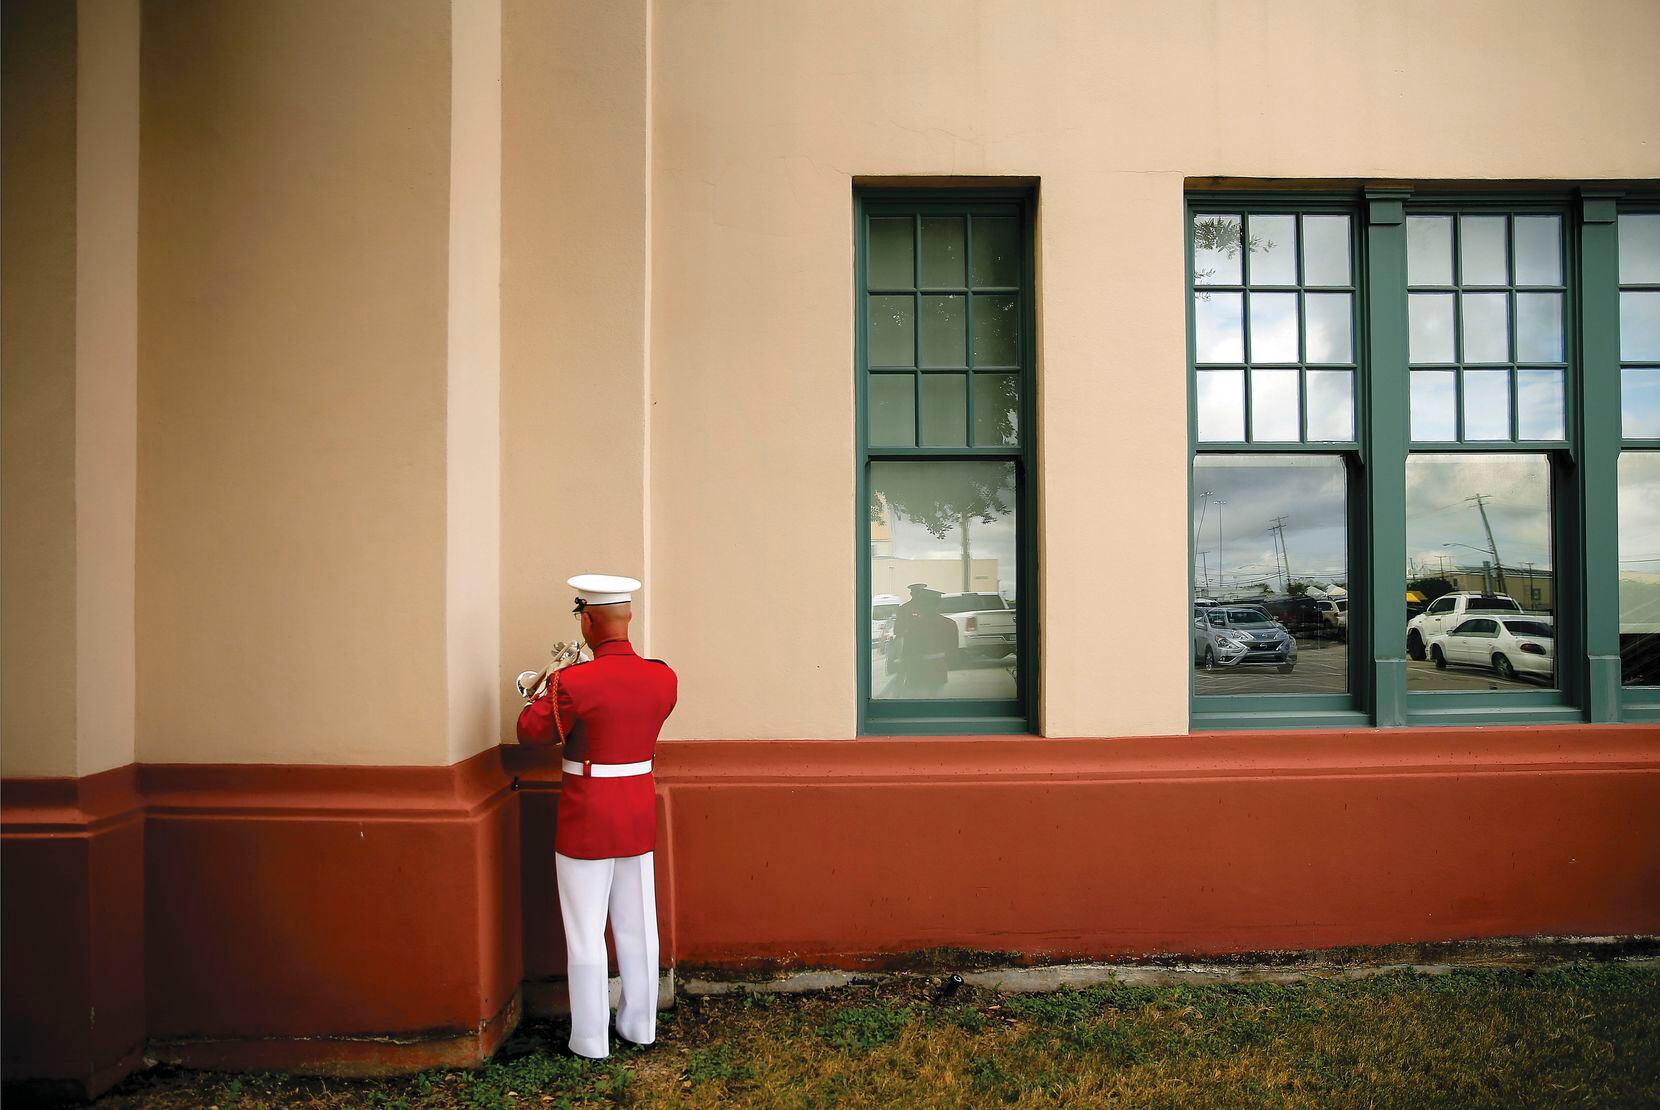 Master Sgt. Michael Fulwood uses a corner of the Women's Museum to warm up on his two-valve soprano bugle before the U.S. Marine Drum and Bugle Corps performance at the State Fair of Texas.
